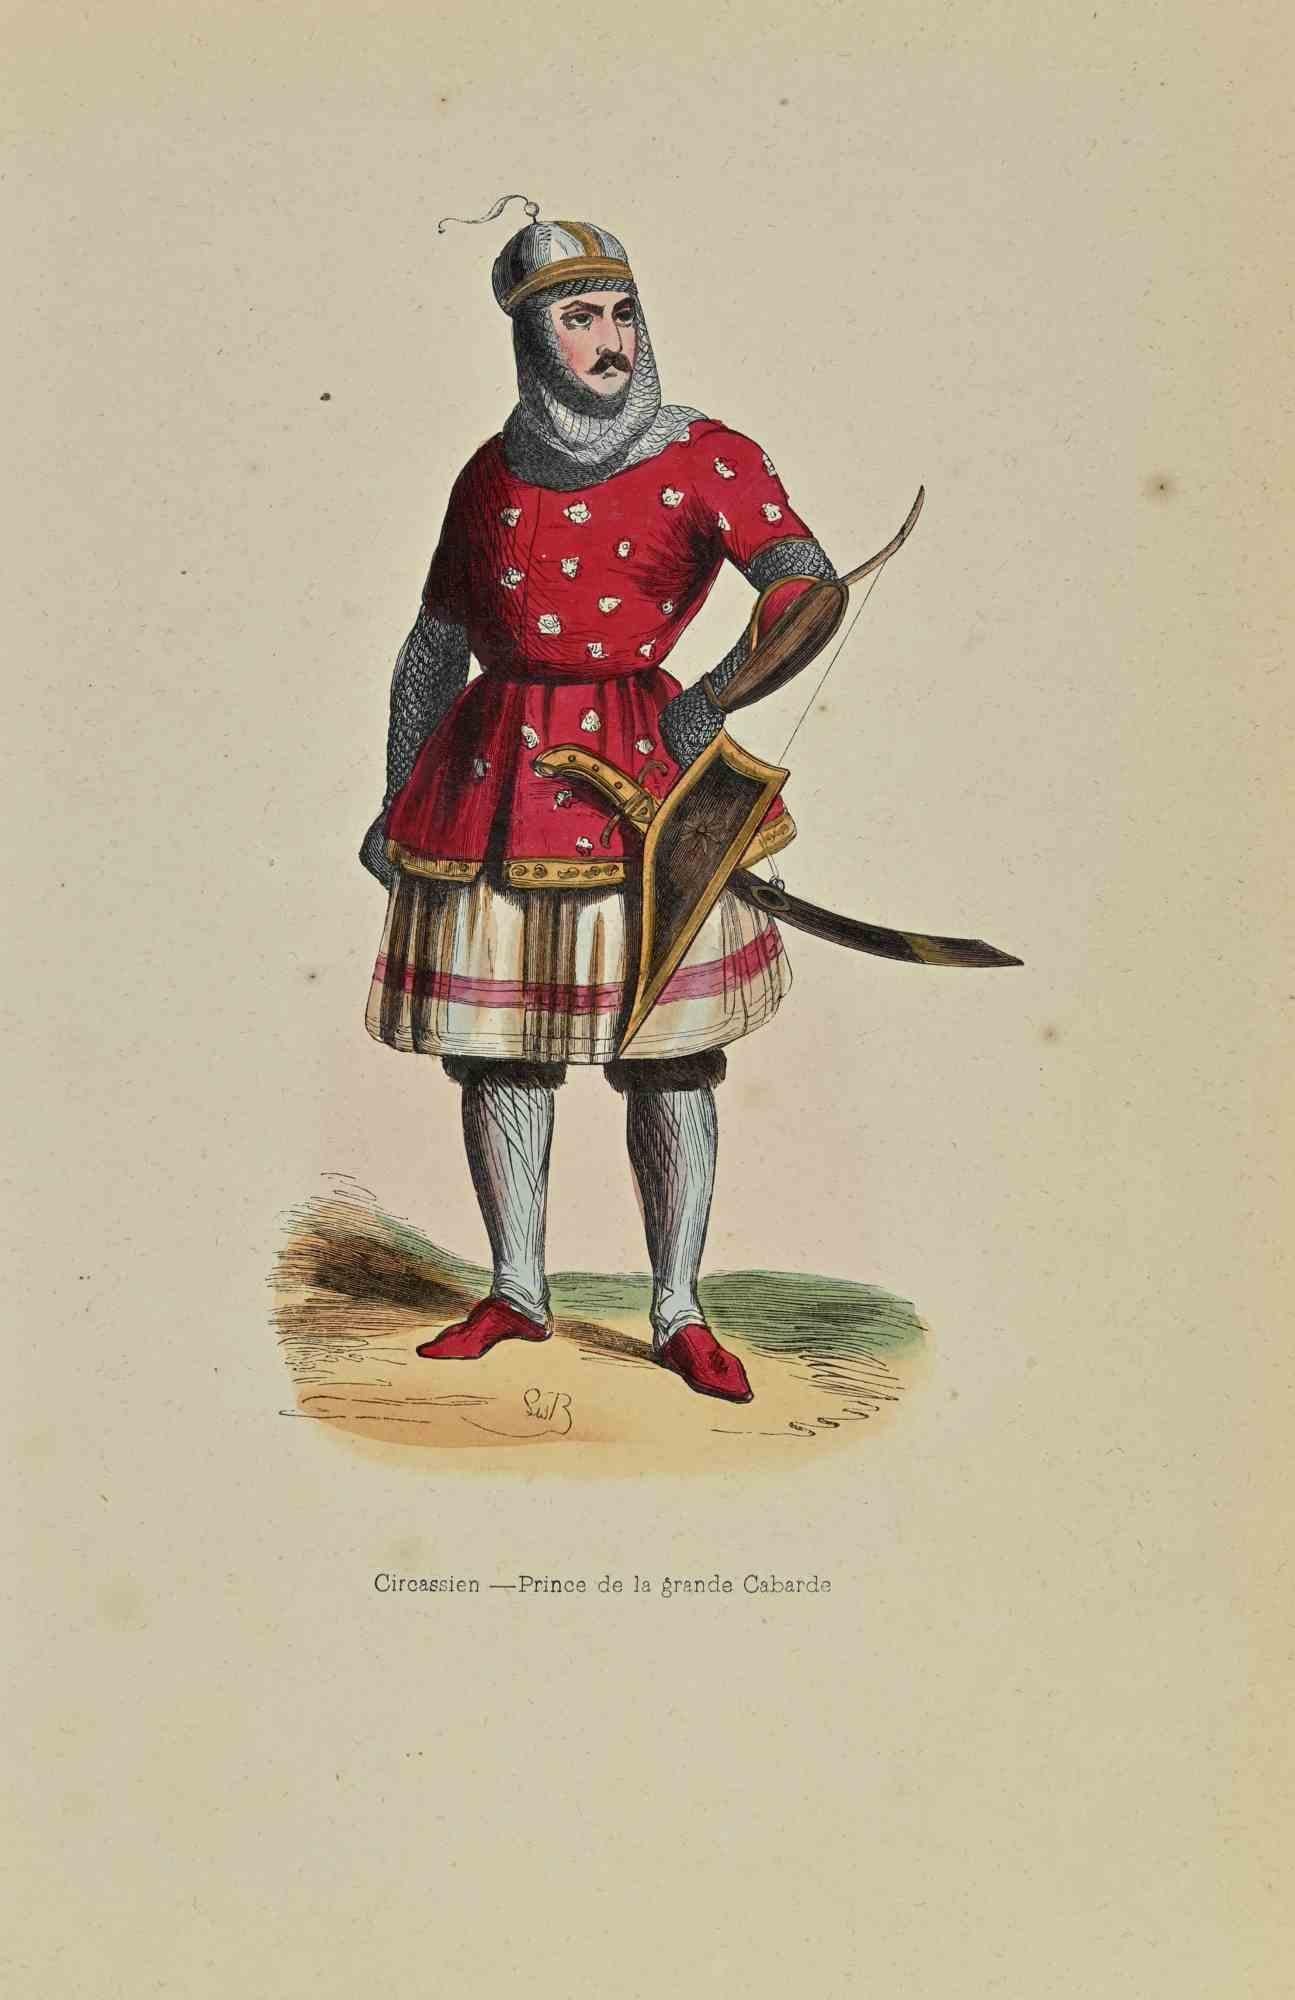 Circus, Prince of the Great Cabarde - Lithograph by Auguste Wahlen - 1844